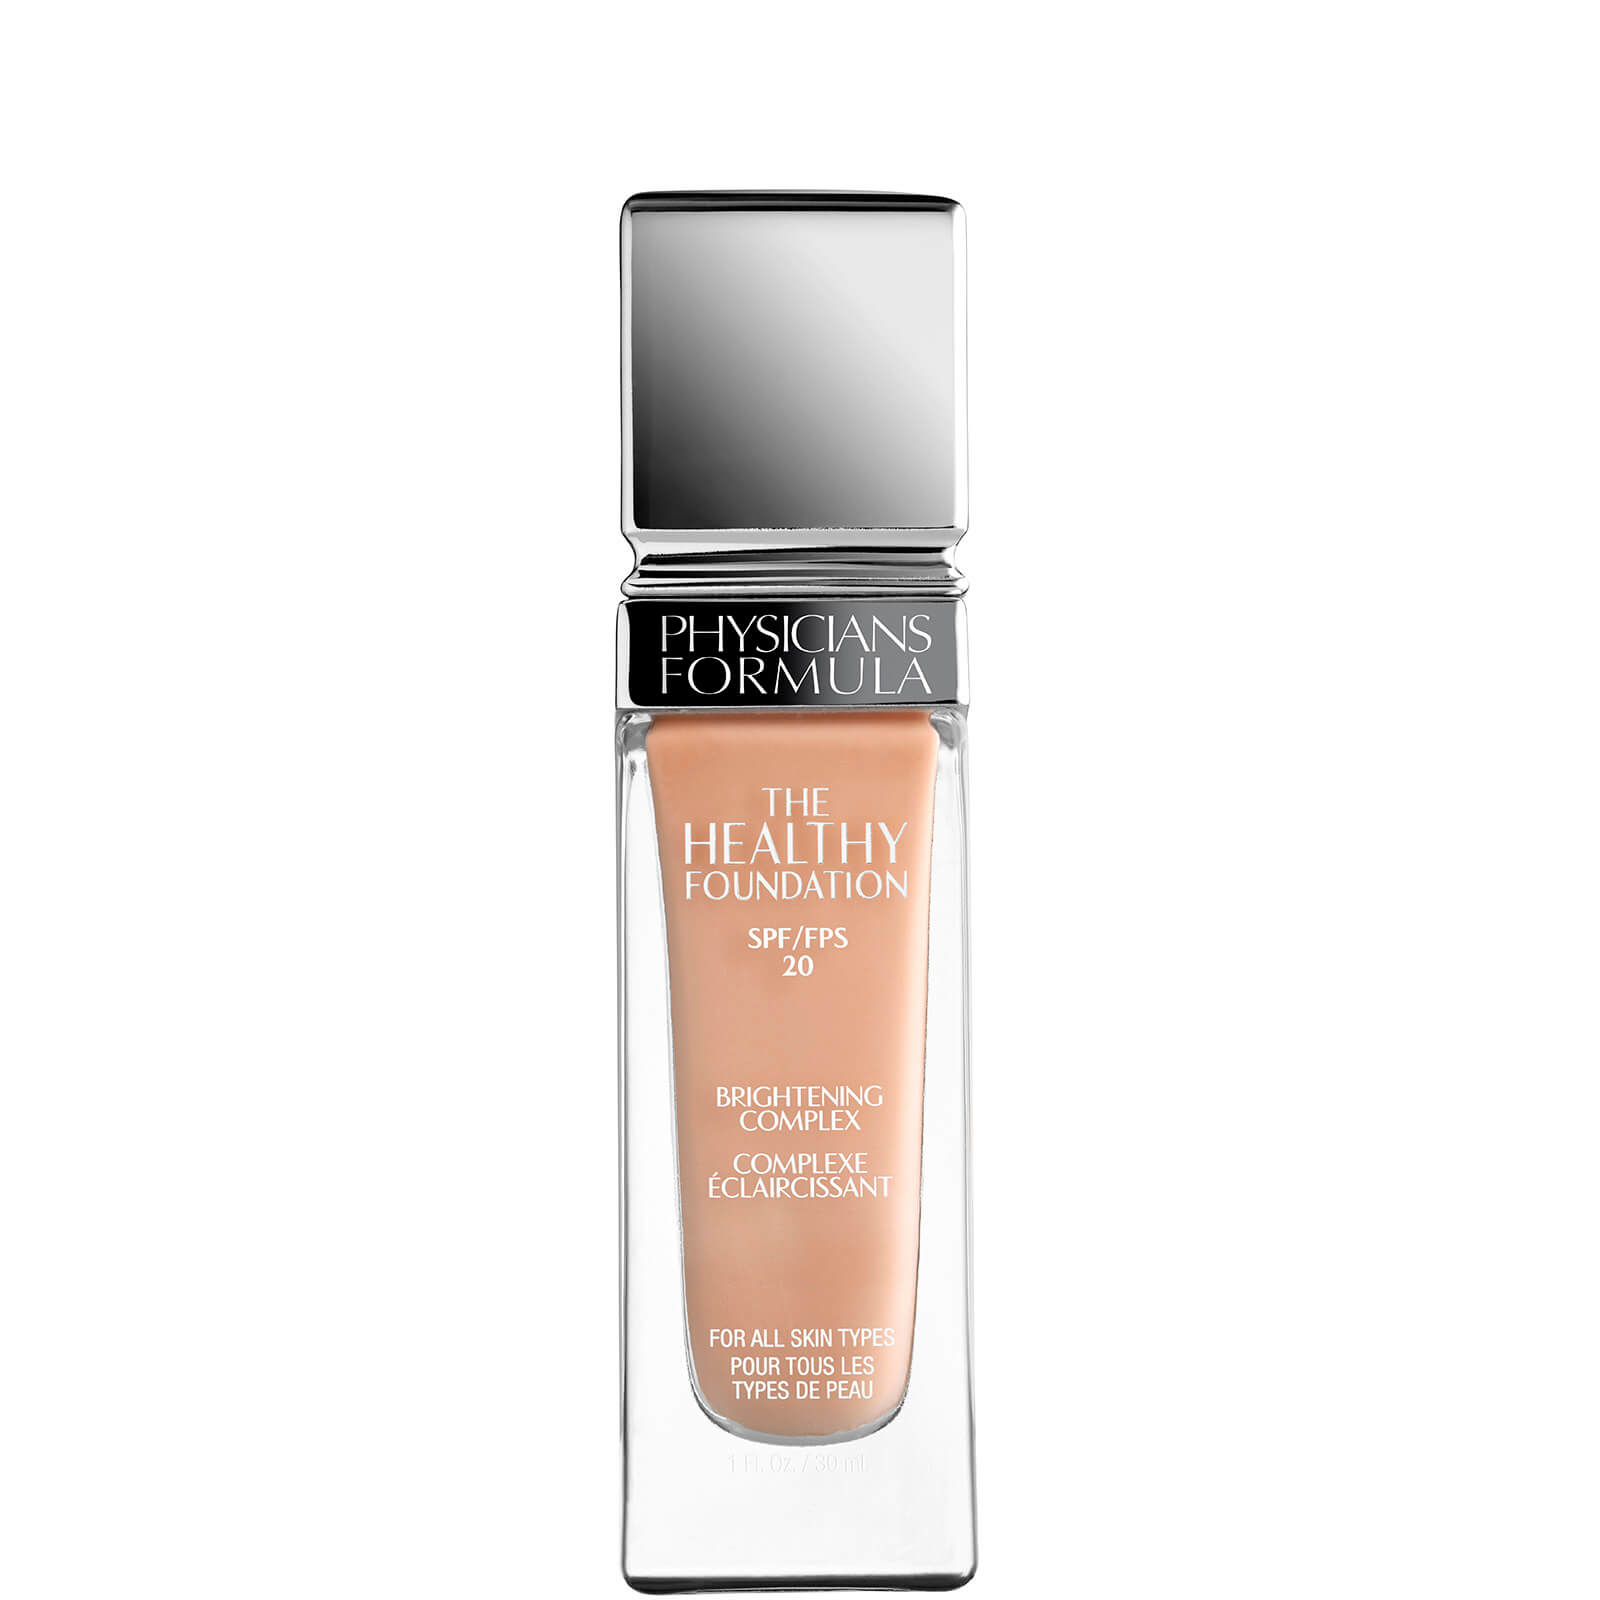 Physicians Formula The Healthy Foundation SPF20 30ml (Various Shades) - LC1